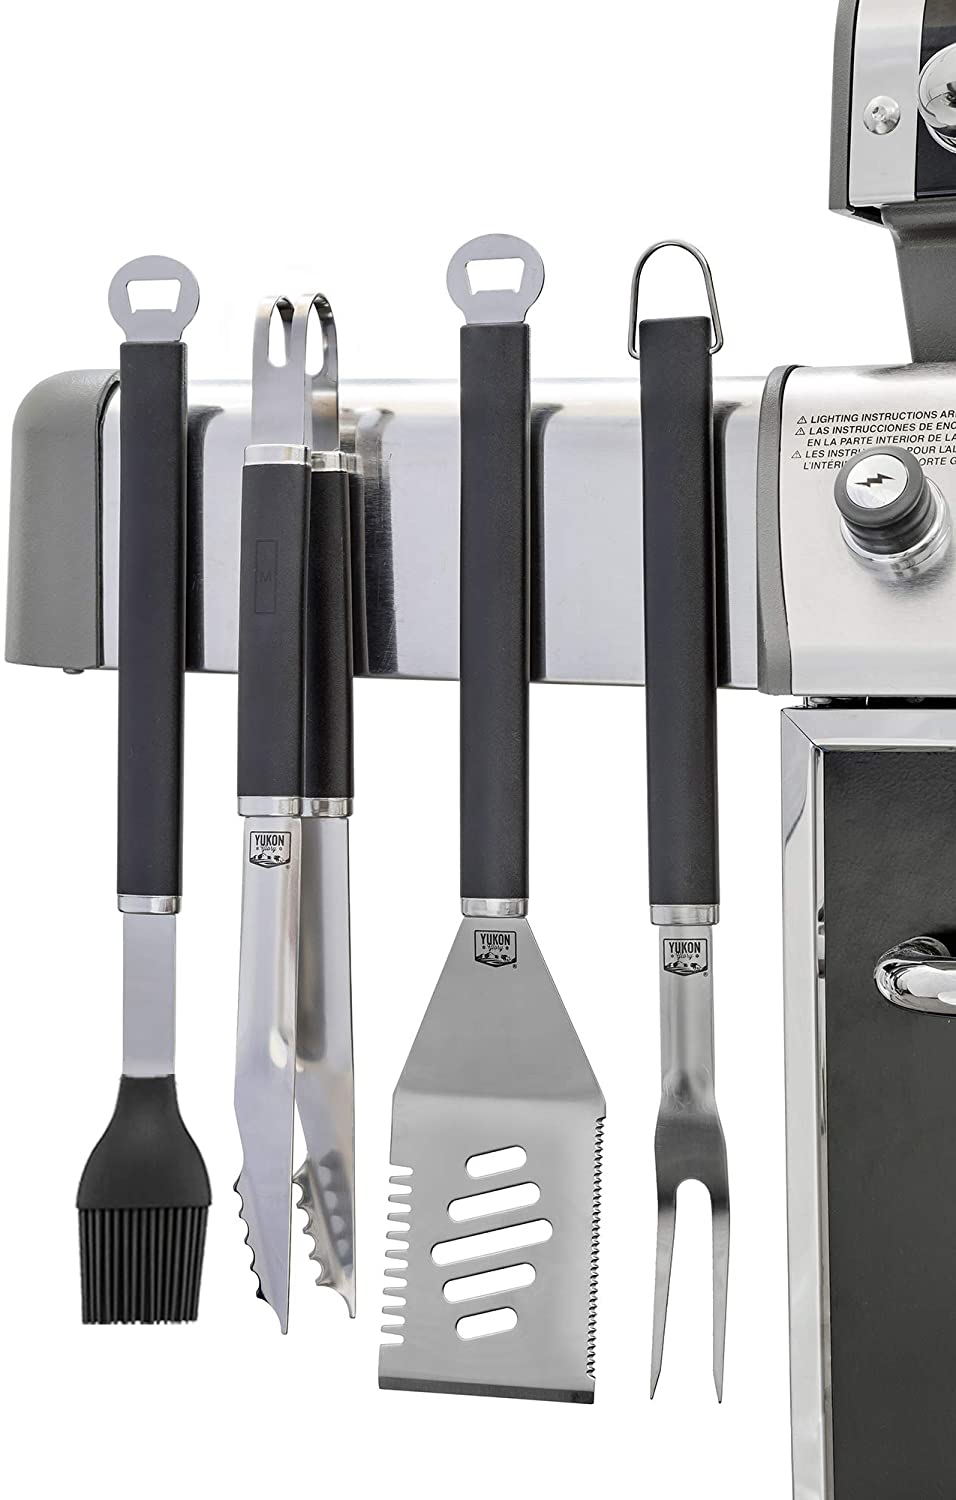 4pc BBQ Tool Utensil Set, Stainless Steel by Pure Grill, 1 x 17.5